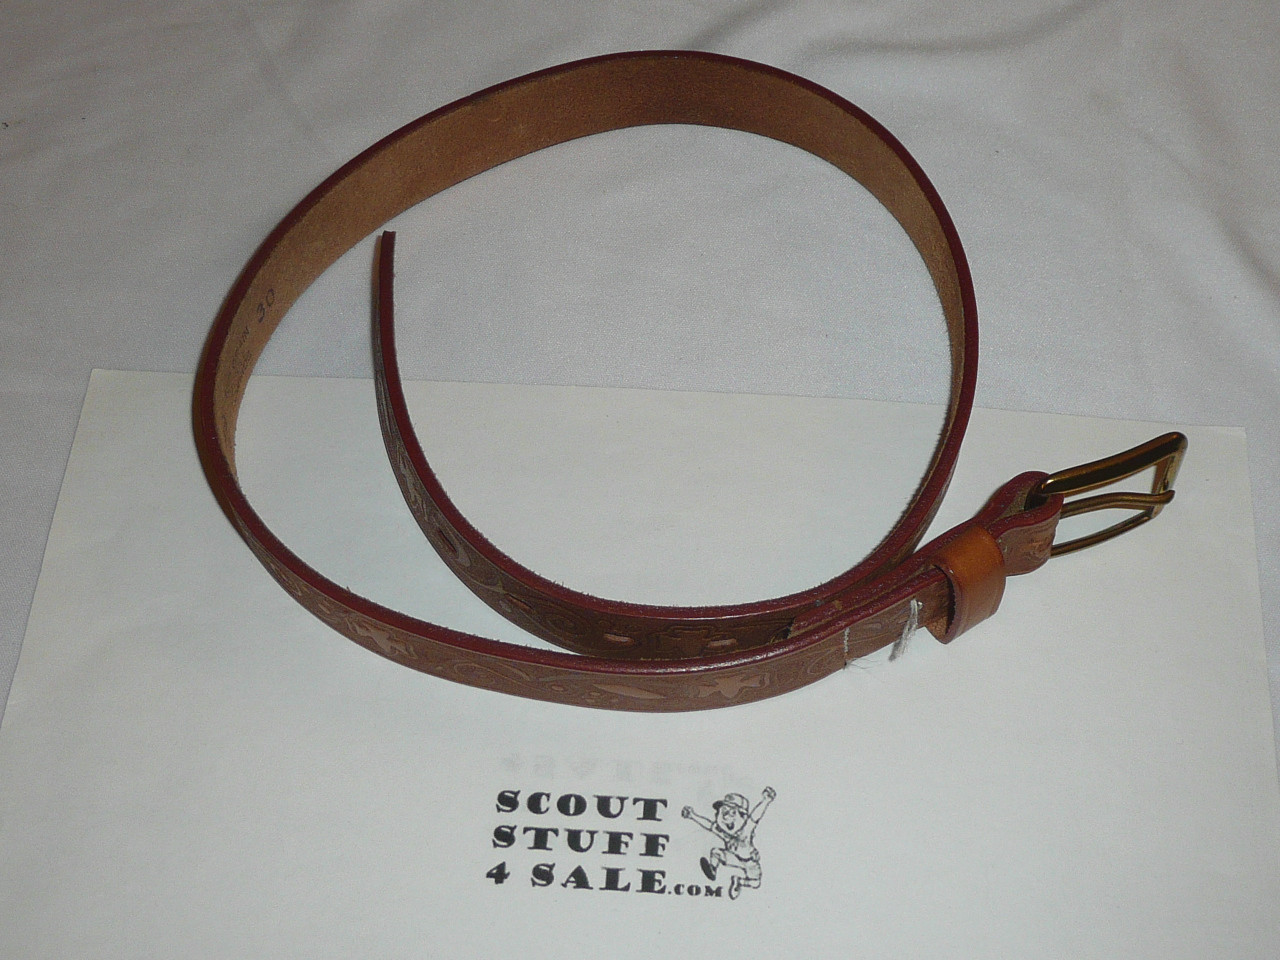 Girl Scout Decorated Leather Belt, 30" Waist, unused